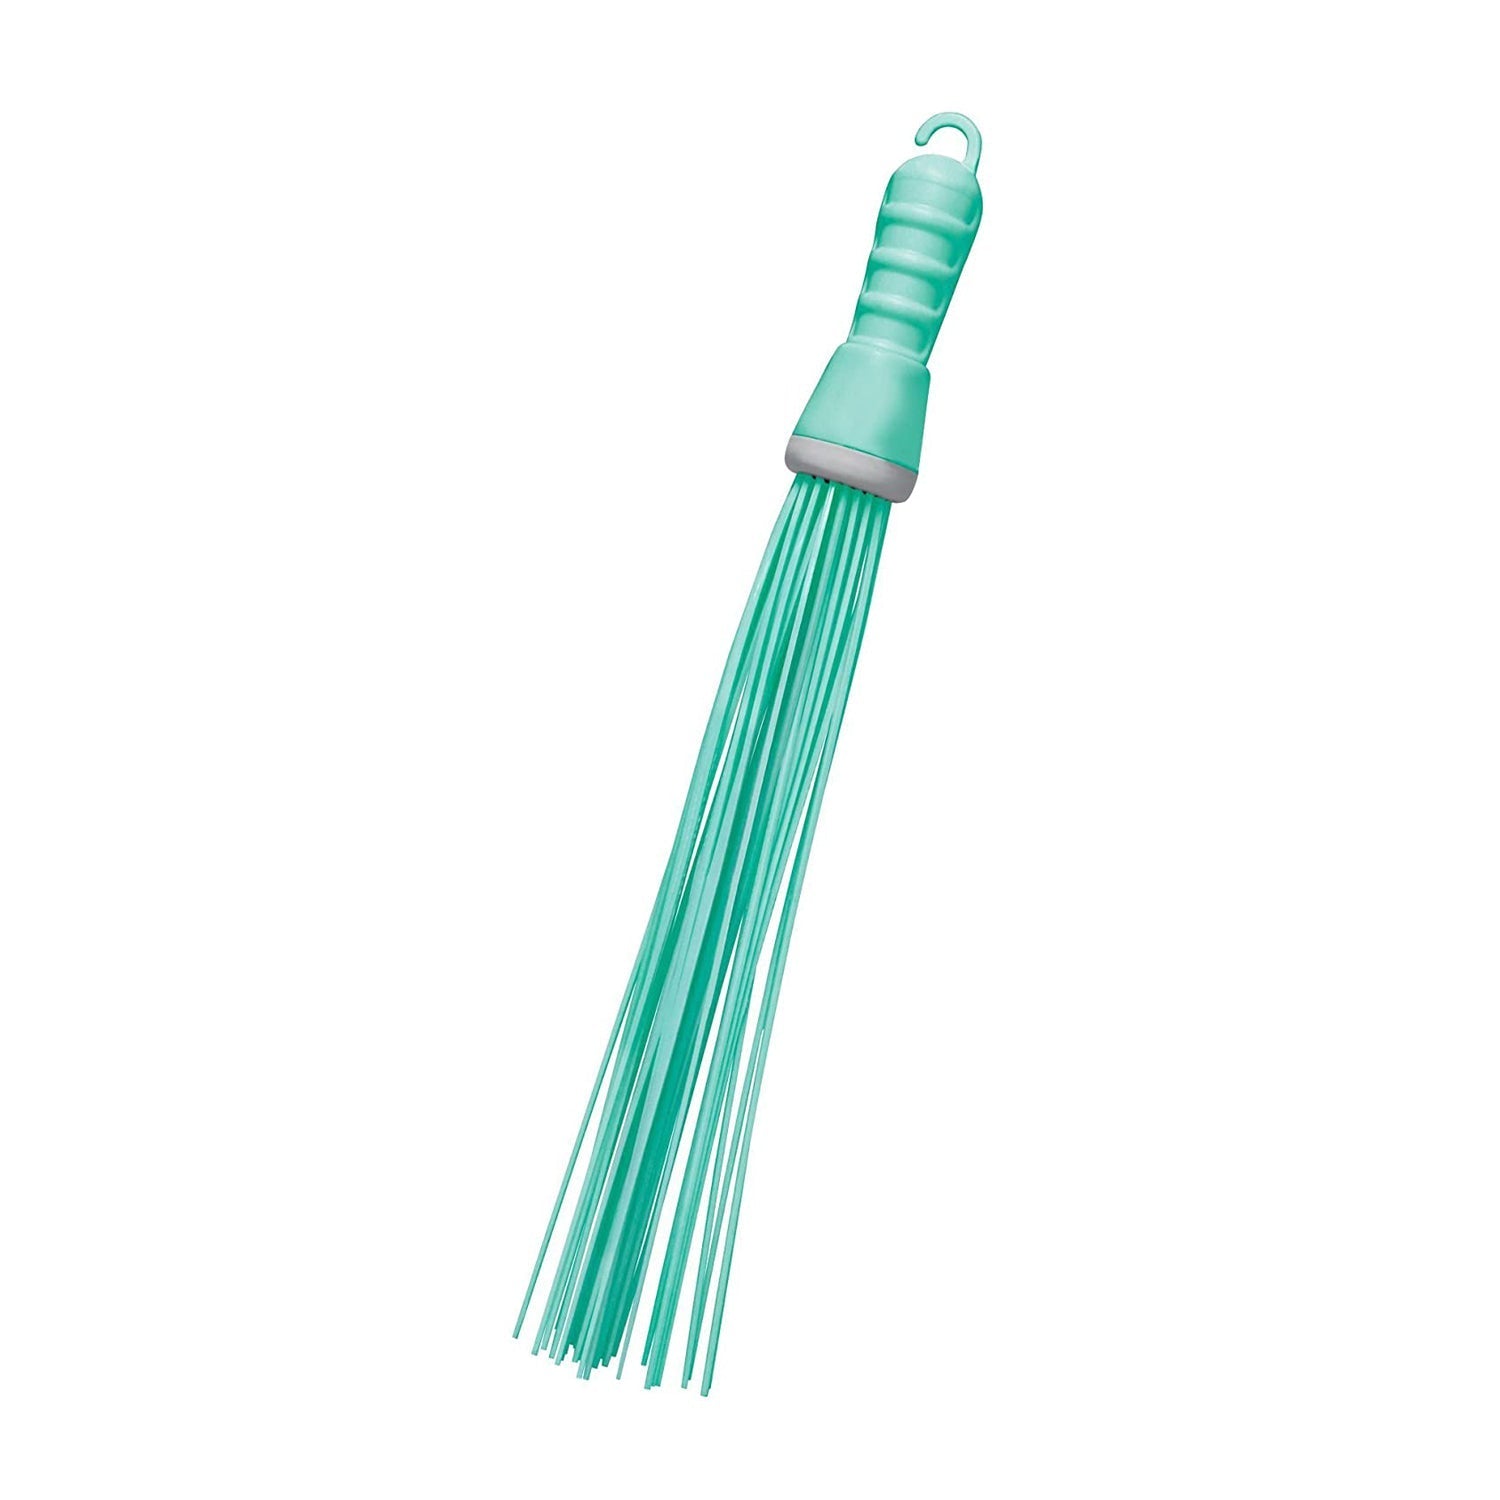 4024 Plastic Hard Bristle Broom for Bathroom Floor Cleaning and Scrubbing, Wet and Dry Floor Cleaning Dukandaily